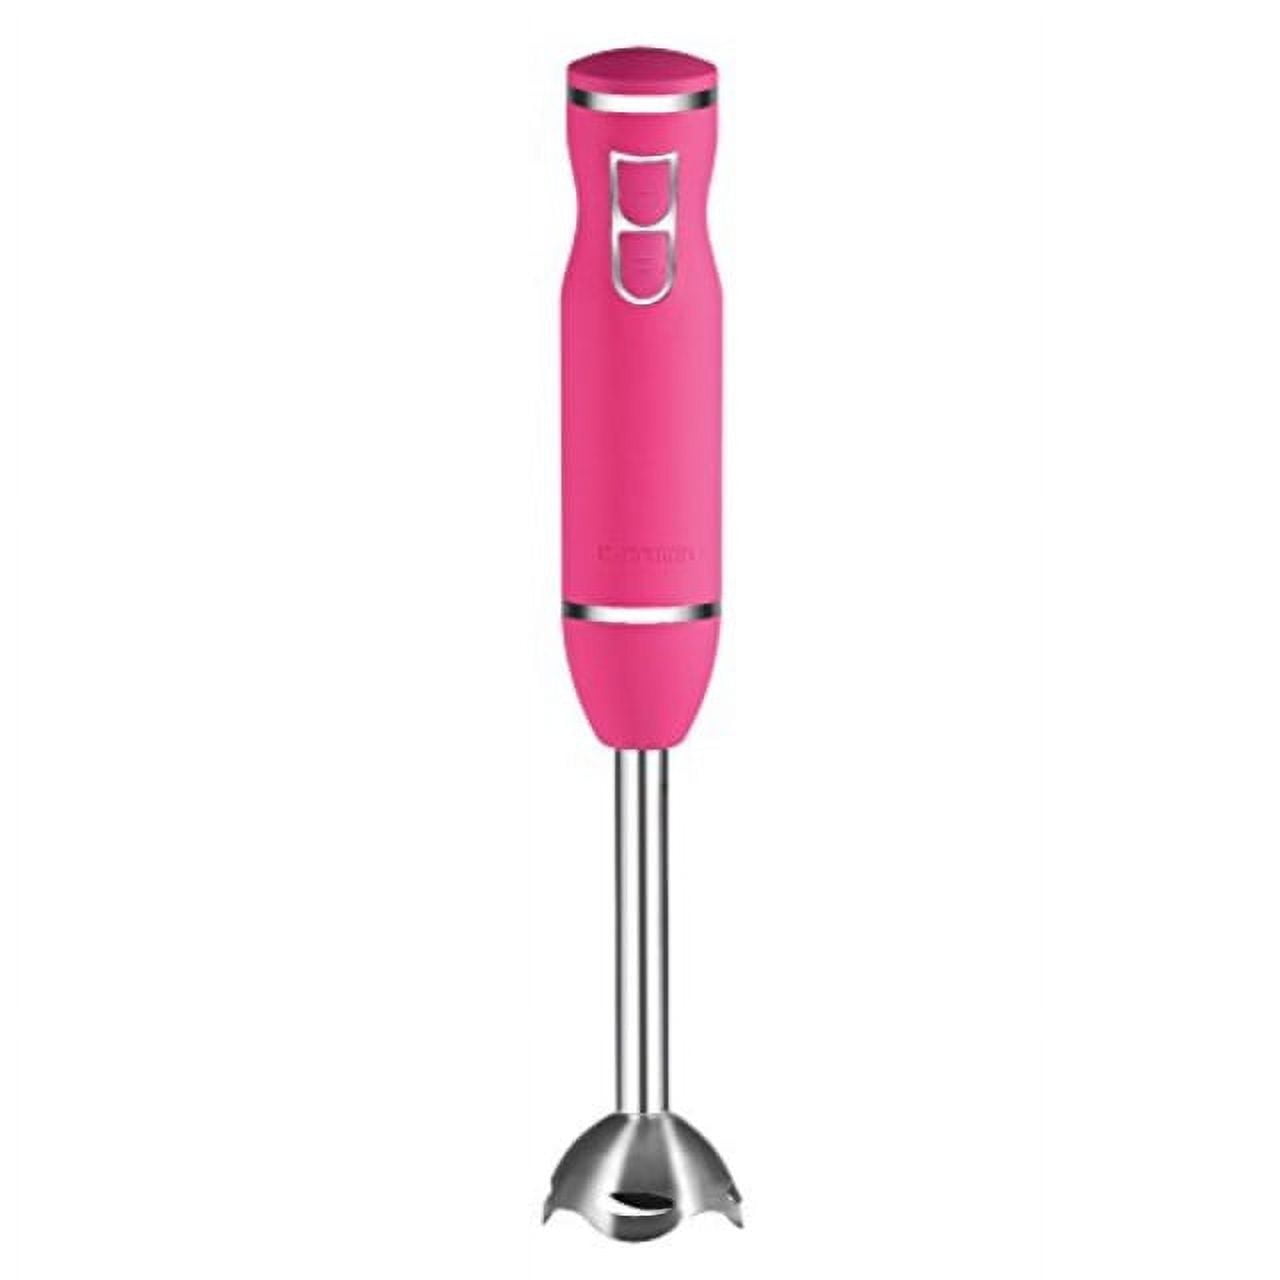 Chefman Electric Immersion Stick Hand Blender, Stainless Steel